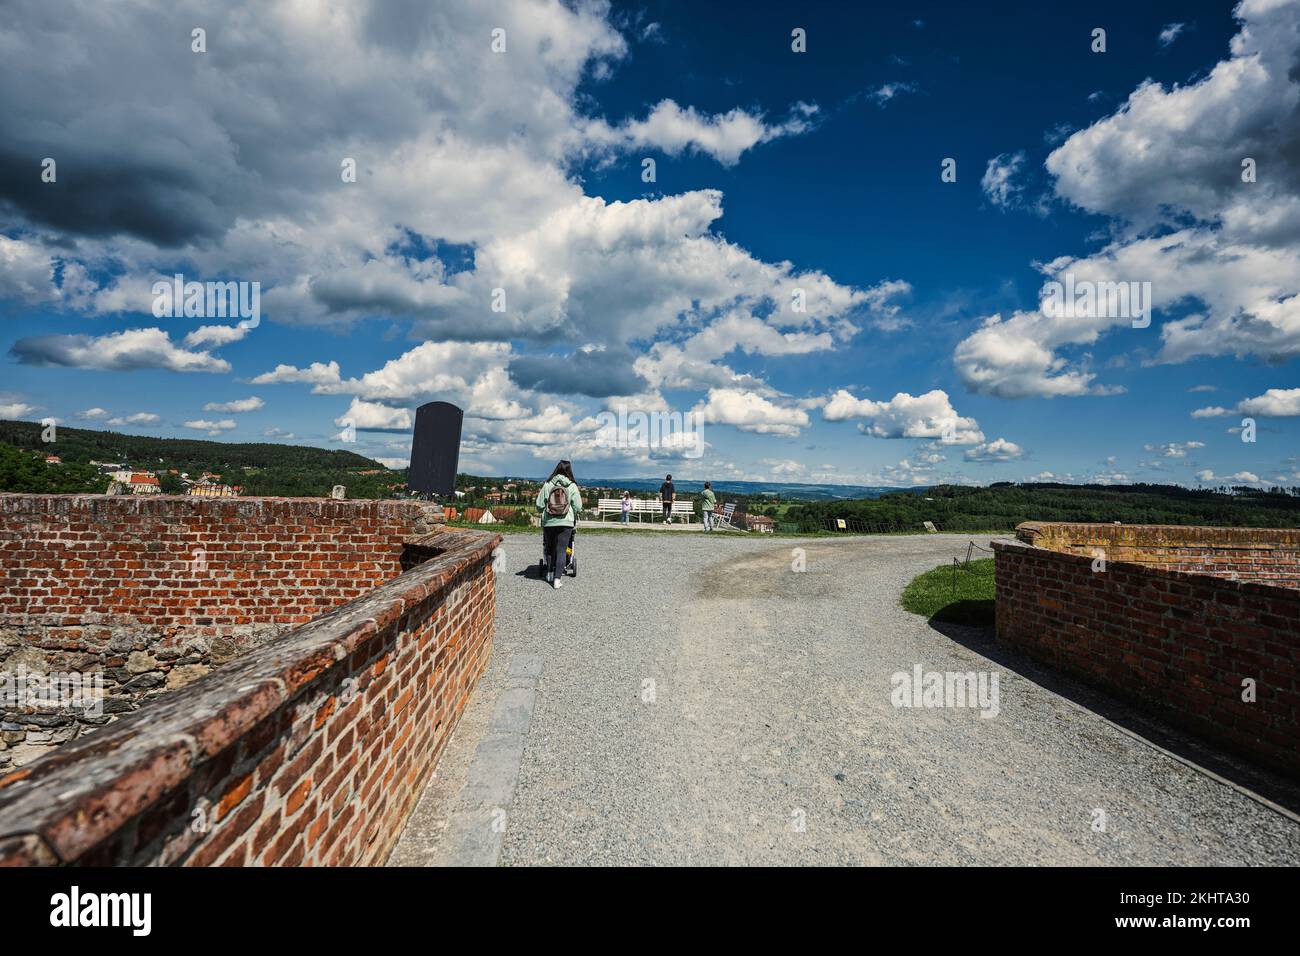 Back of mother with children walking at Chateau Kunstat, Czech Republic. Stock Photo